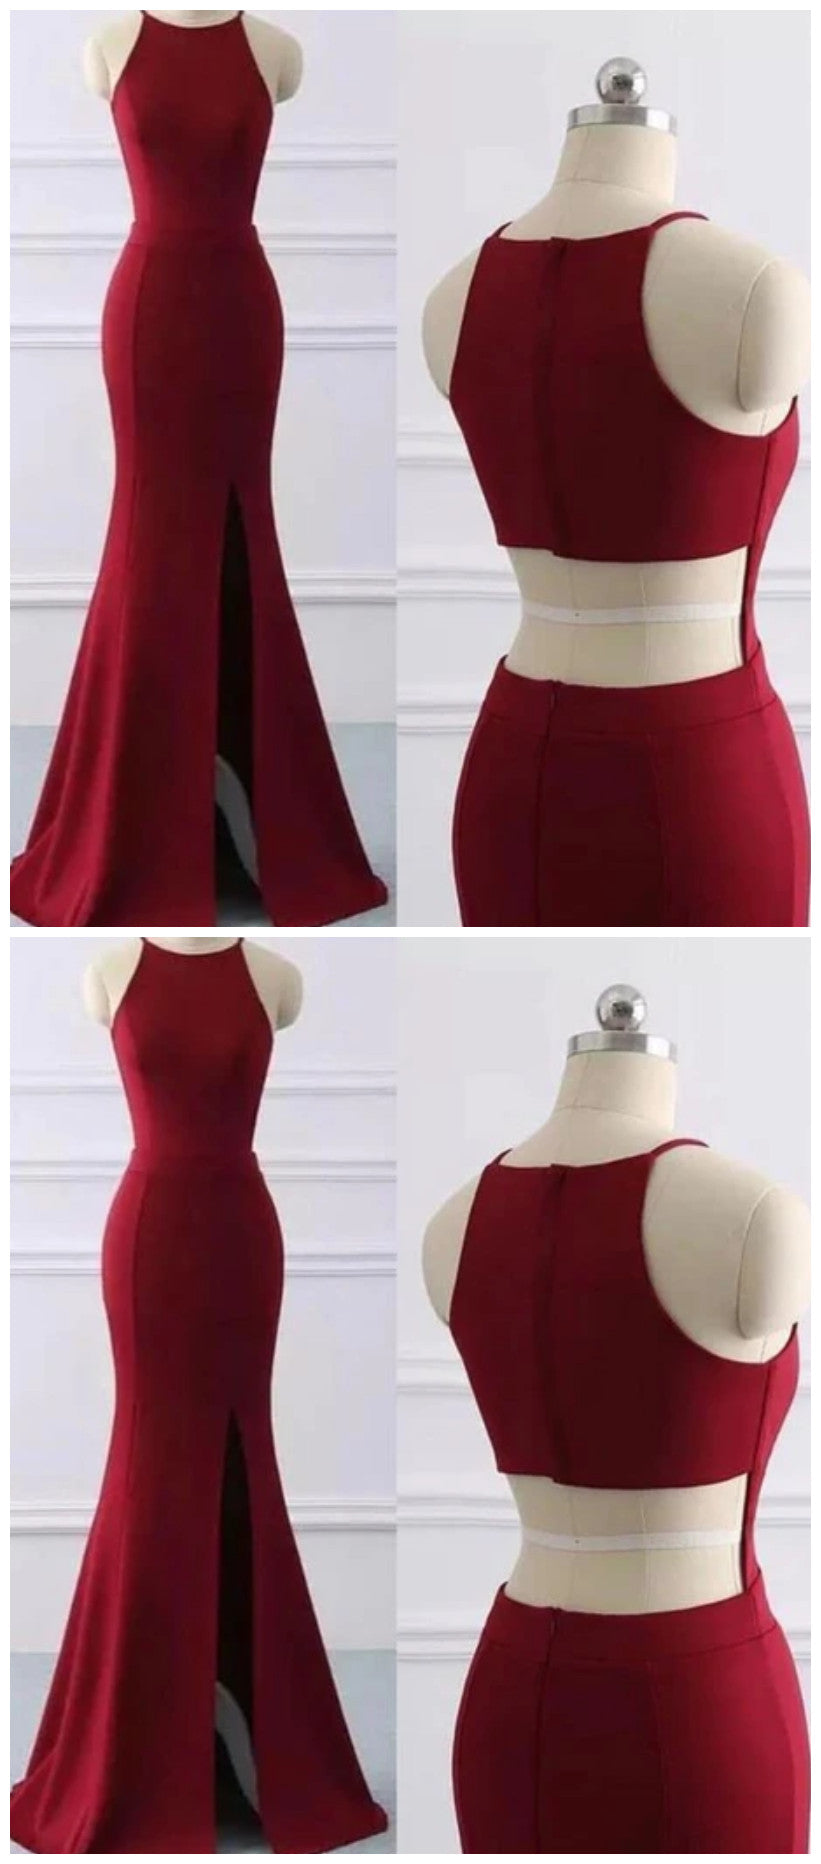 Wine Red Halter Mermaid Long Party Dress with Leg Slit, Sexy Long Formal Dress Evening Dress